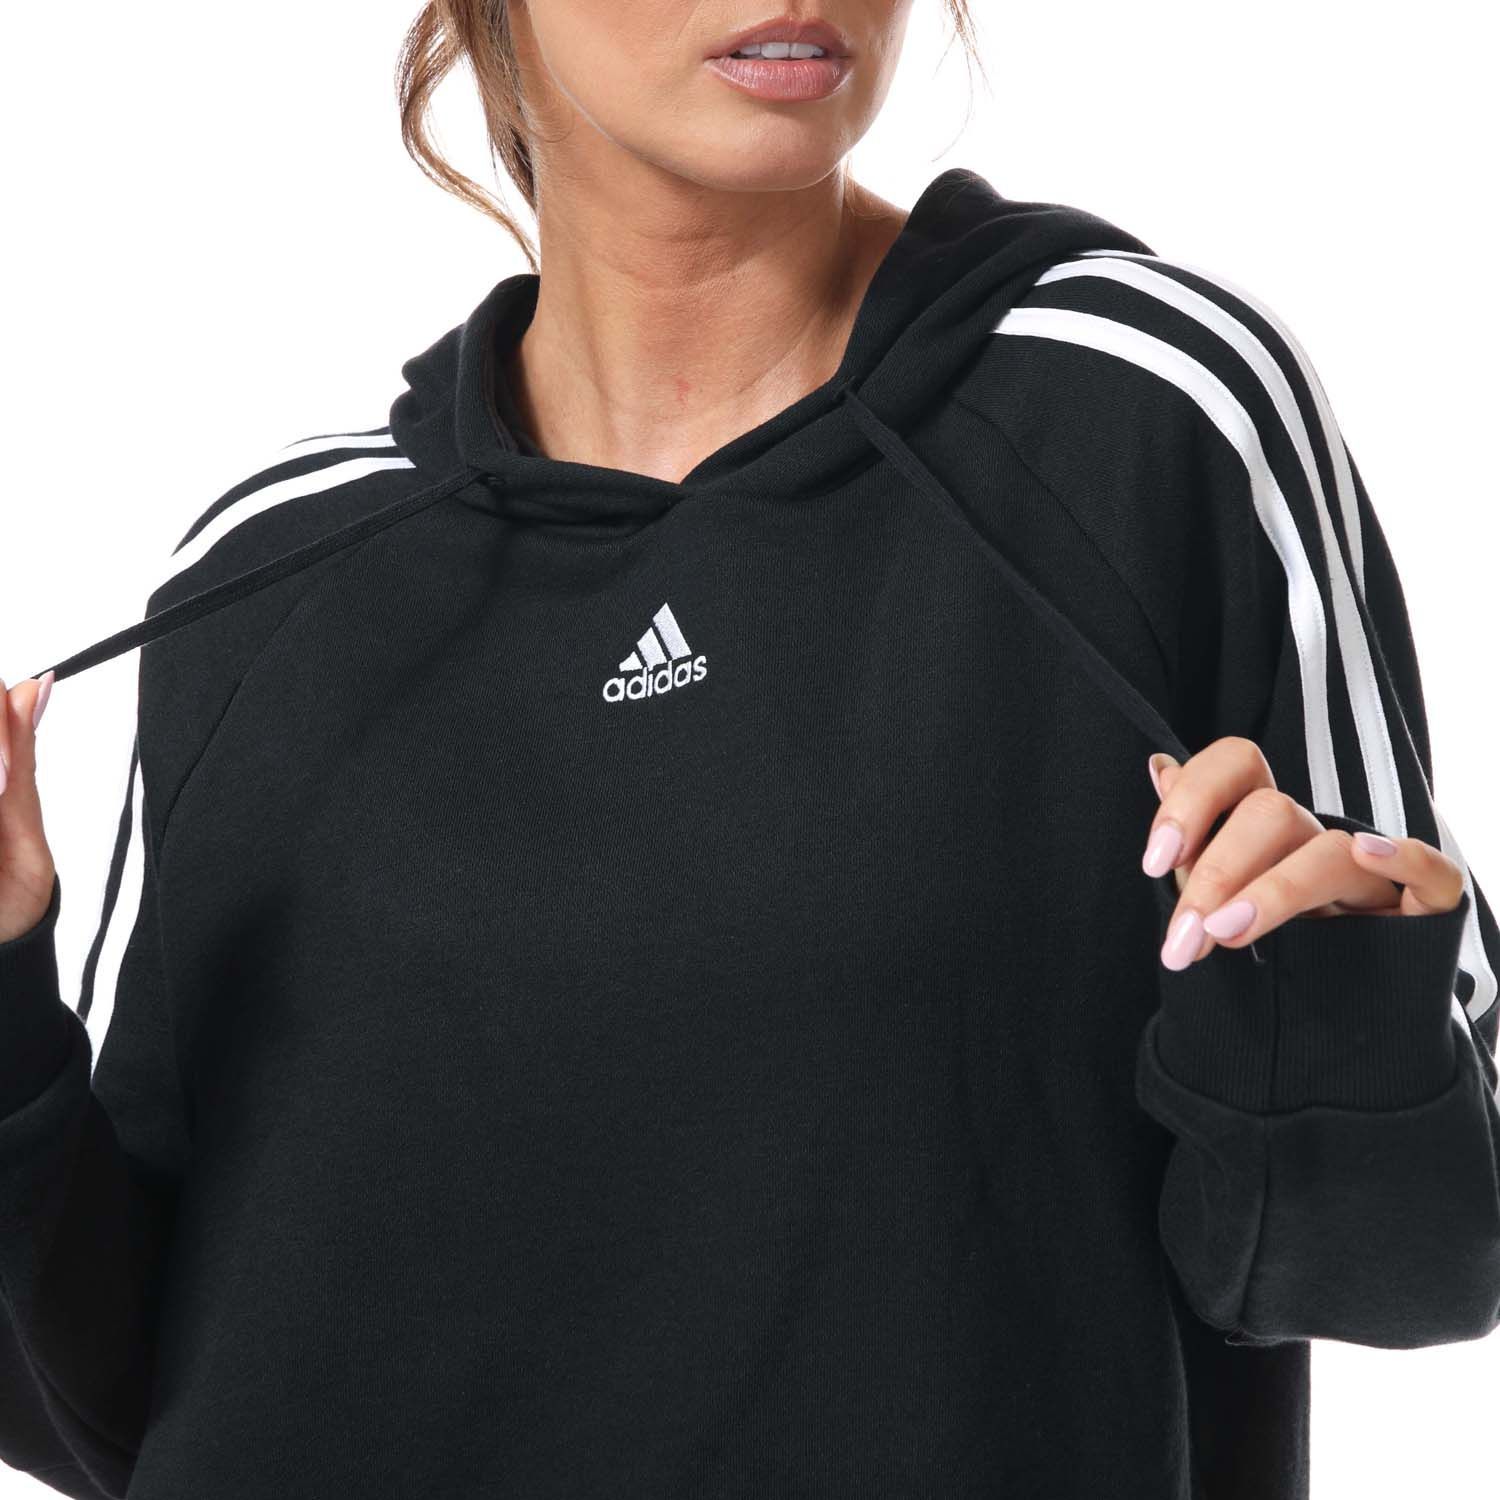 Womens adidas Essentials 3- Stripes Cropped Hoody in black.- Drawcord-adjustable hood.- Long sleeves.- Ribbed cuffs.- 3-Stripes down both arms.- adidas Badge of Sport logo on the chest.- Relaxed fit.- Main Material: 53% Cotton  36% Polyester (Recycled)  11% Rayon. Hood Lining: 100% Cotton. - Ref:GL1460